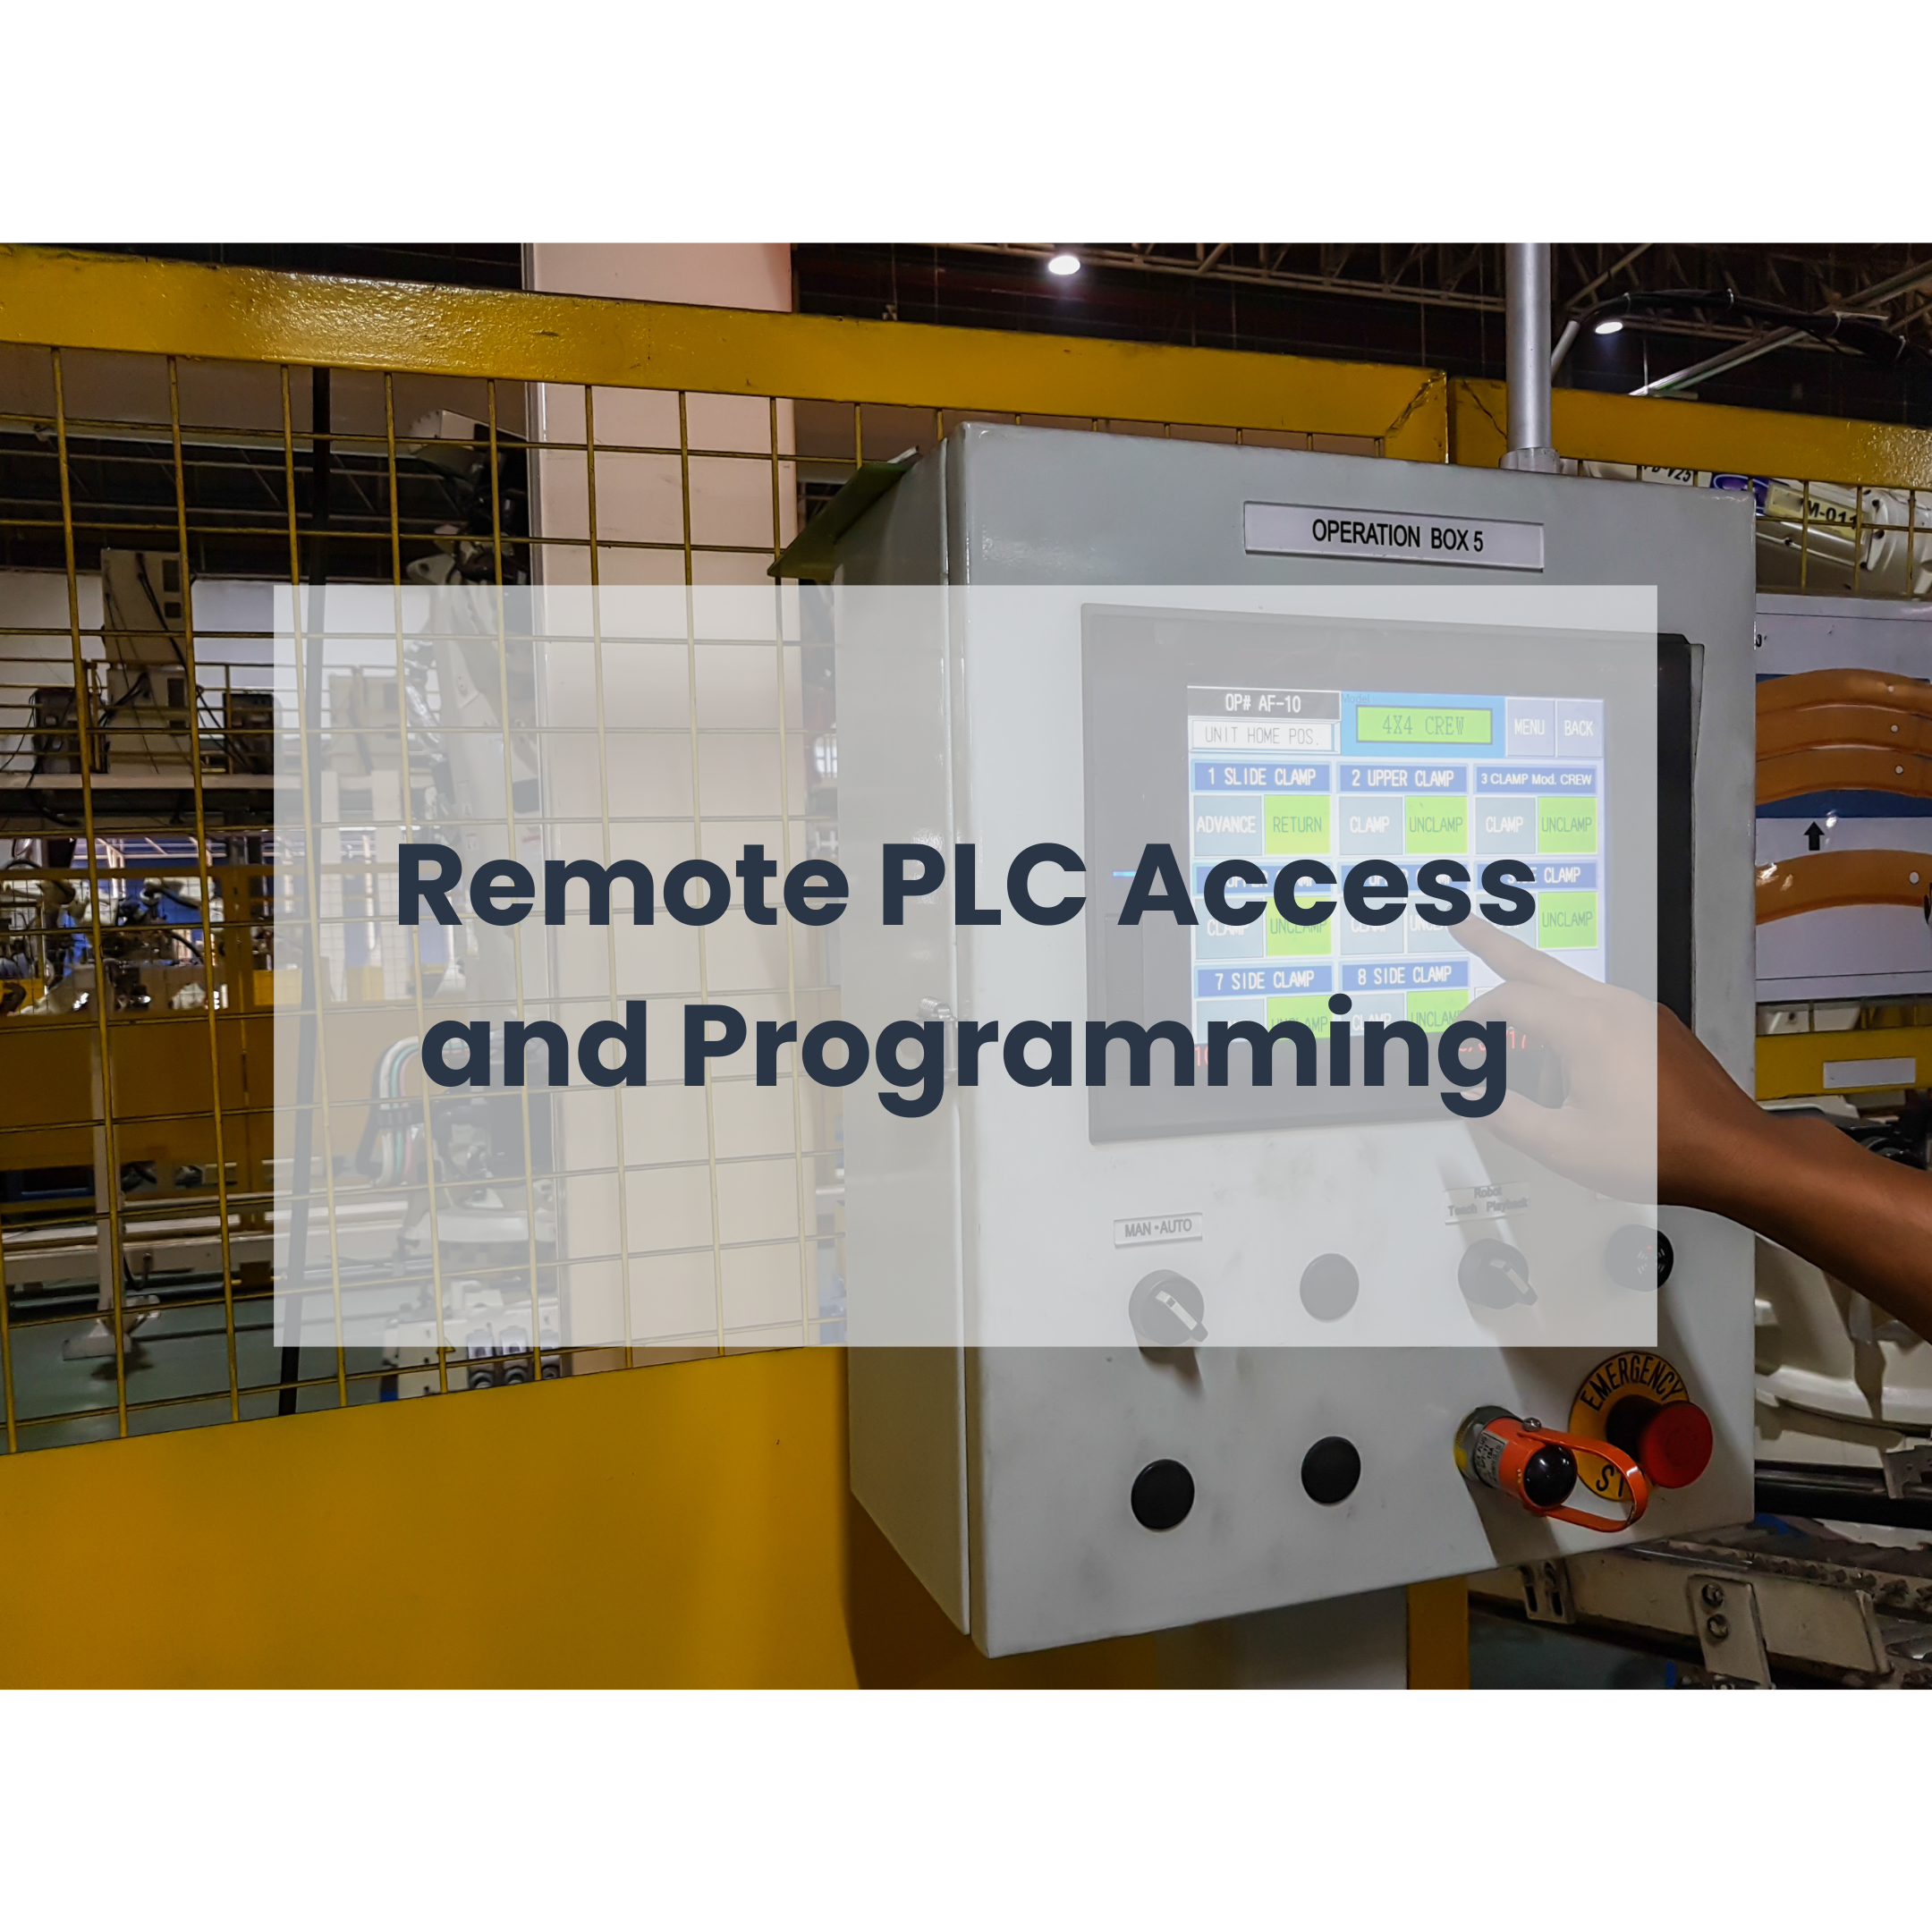 Remote PLC Access and Programming: VPN Solutions with RLTK421 and RLTK451